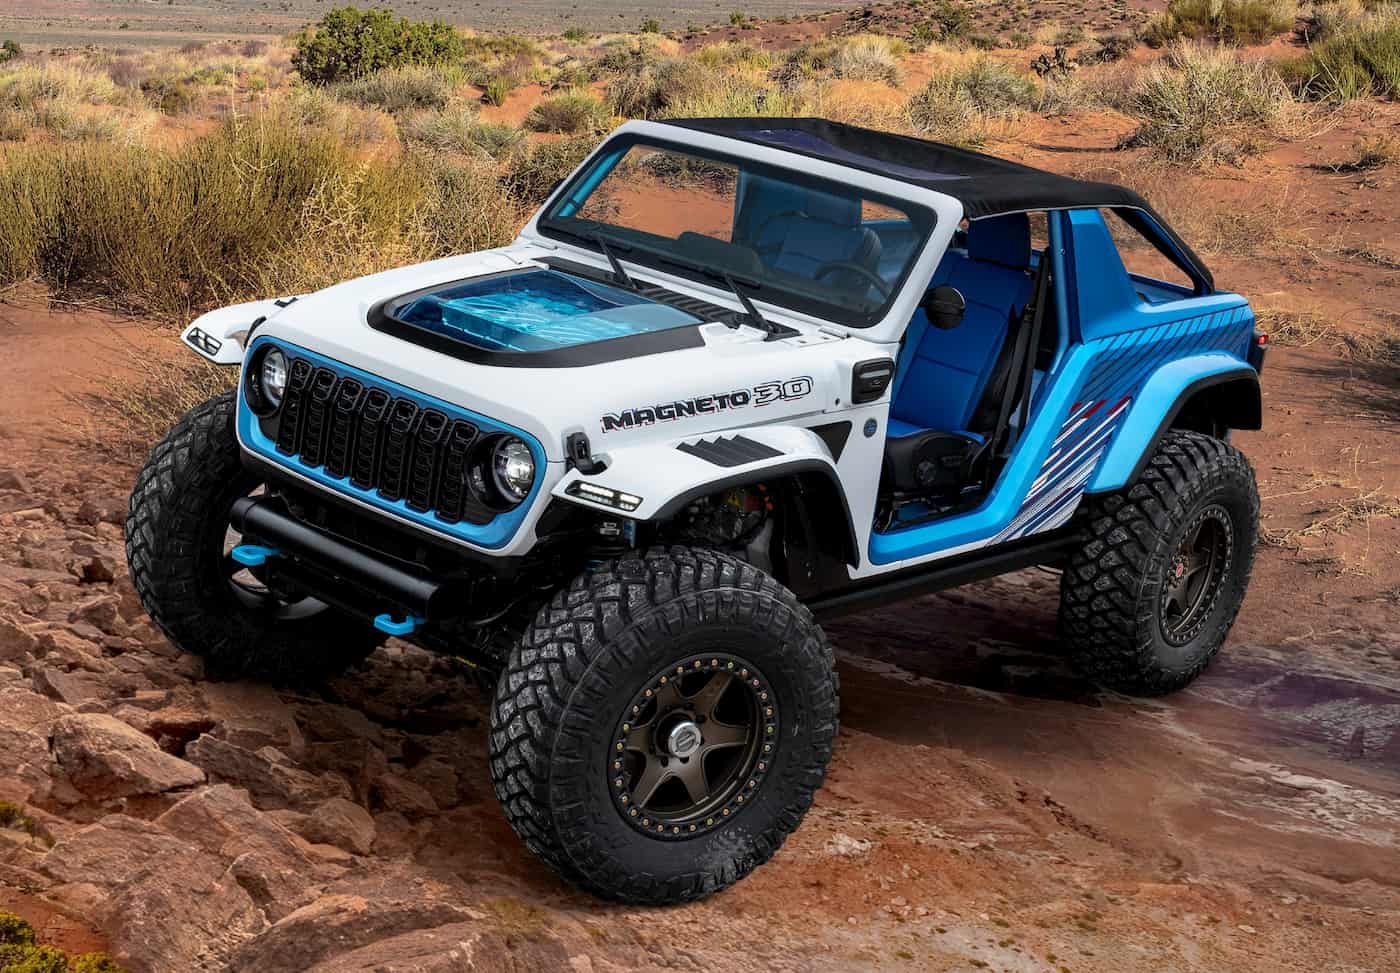 Jeep converts iconic Wrangler to an electric offroad 650hp beast with